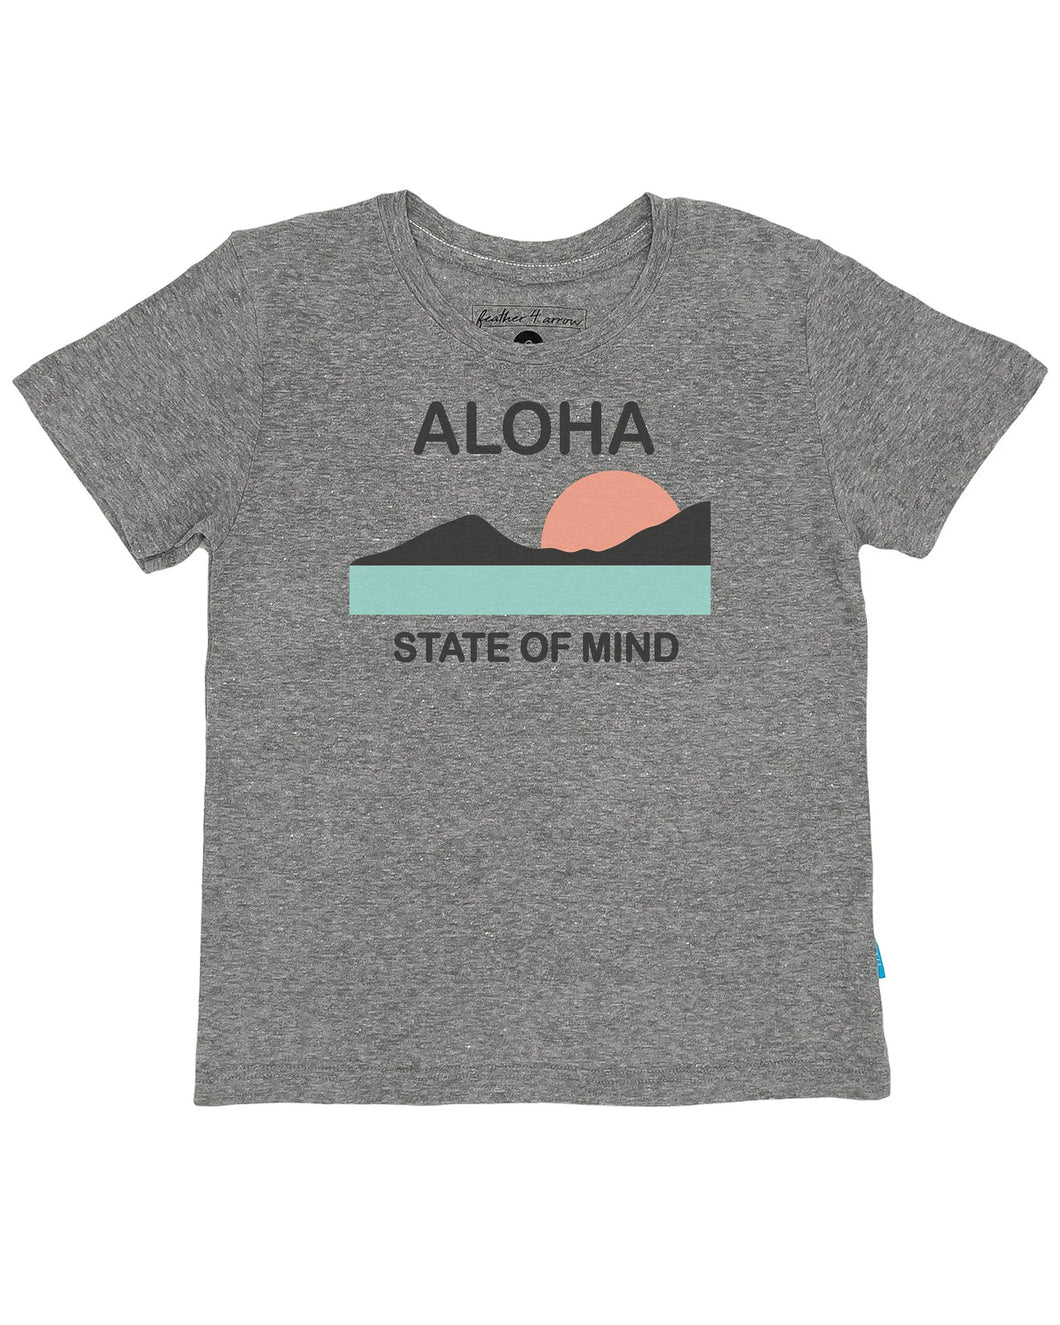 Aloha State of Mind Vintage Tee in Heather Gray